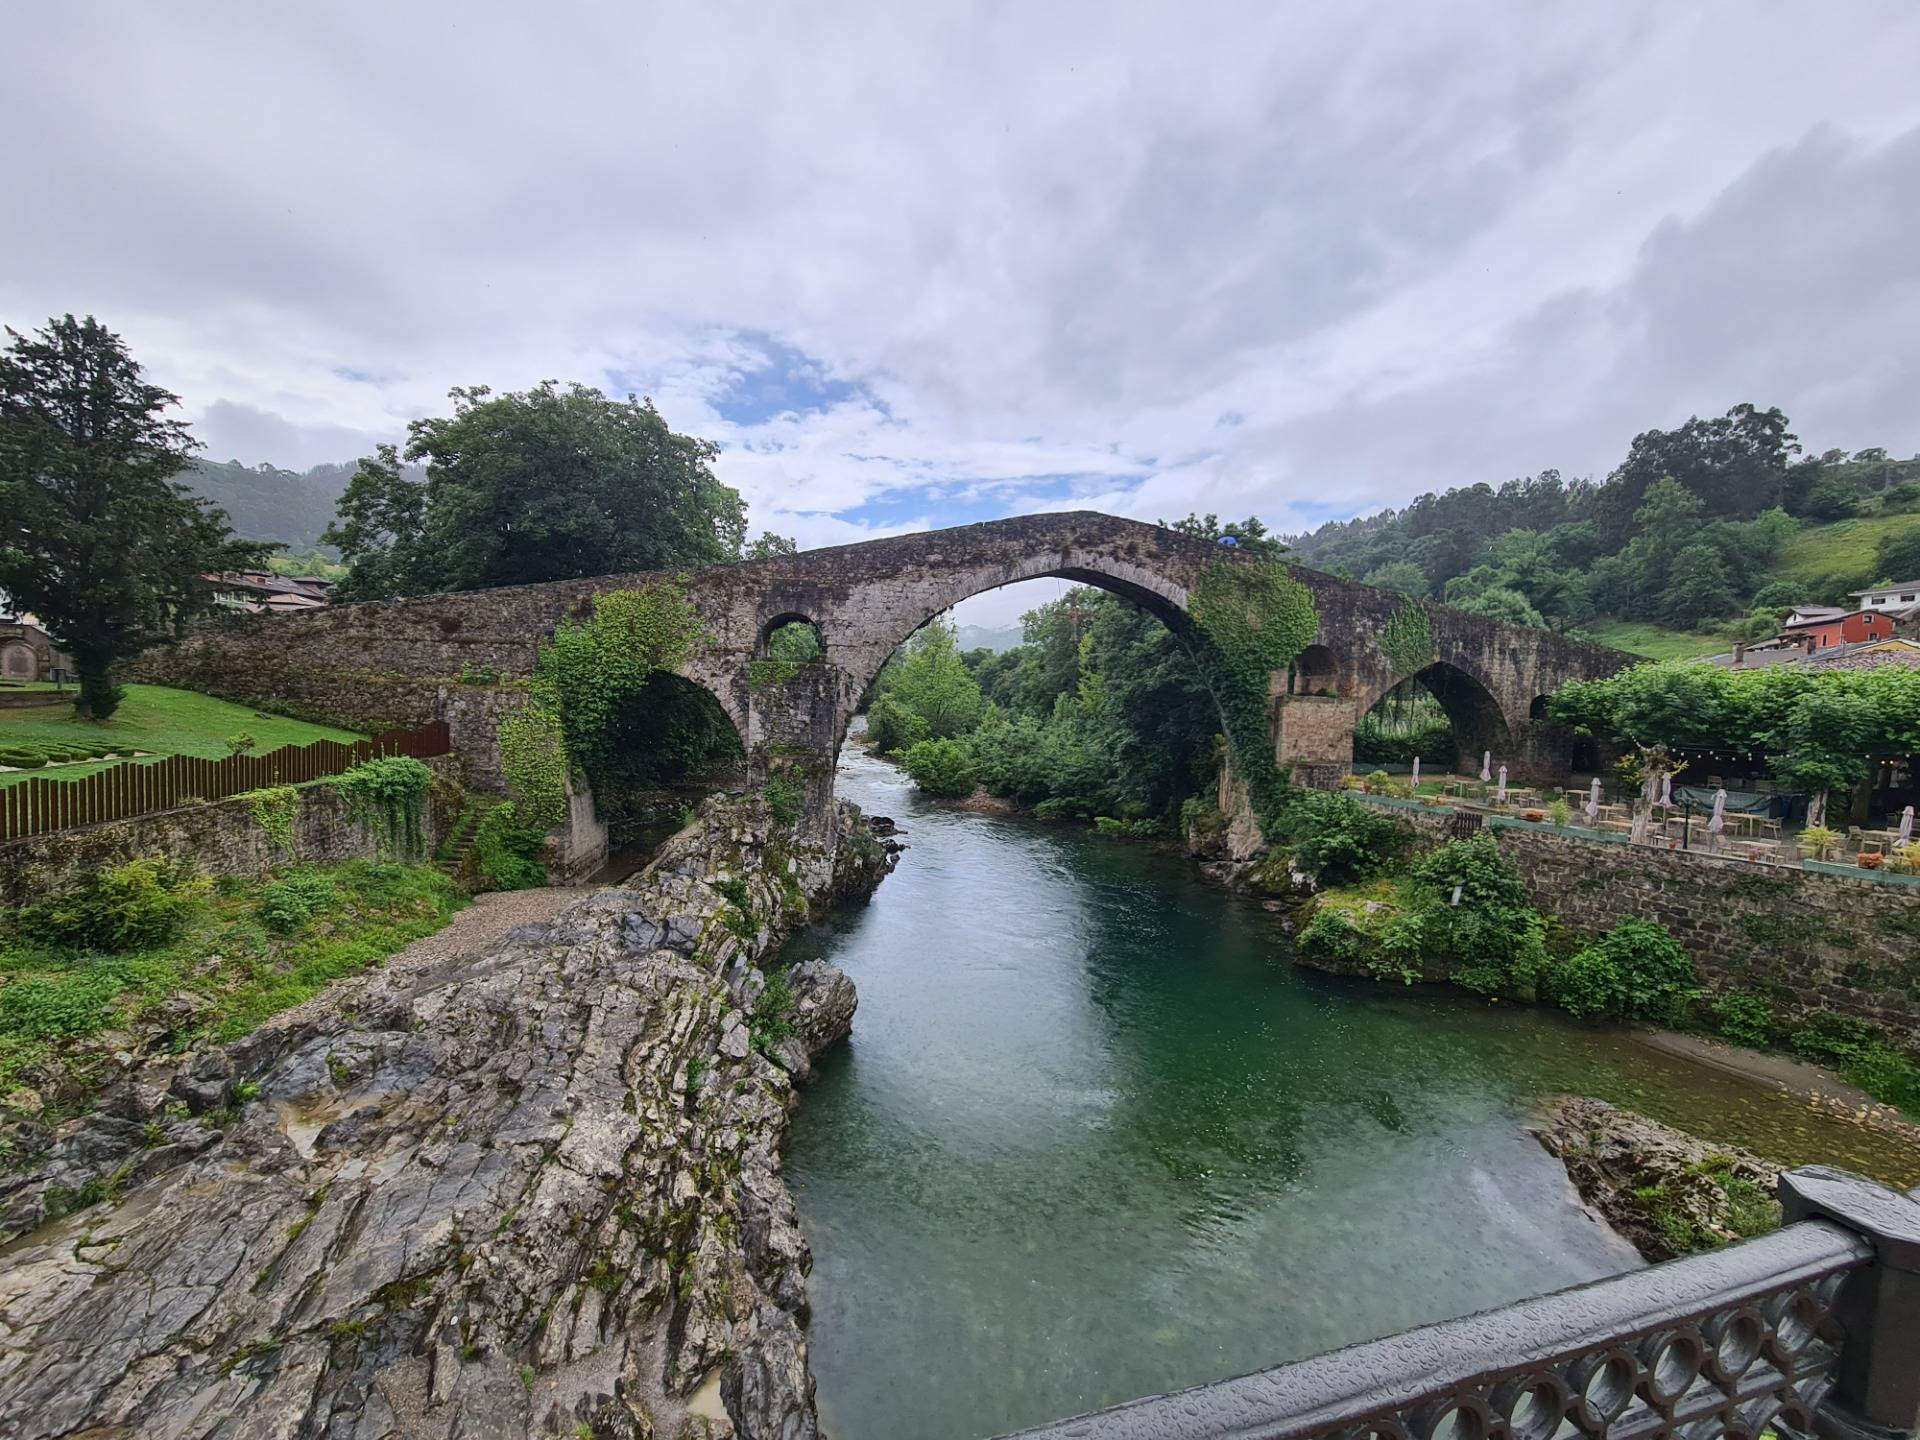 Roman Bridge (although its construction is of medieval origin and not Roman) and Victory Cross, over the Sella river (2).